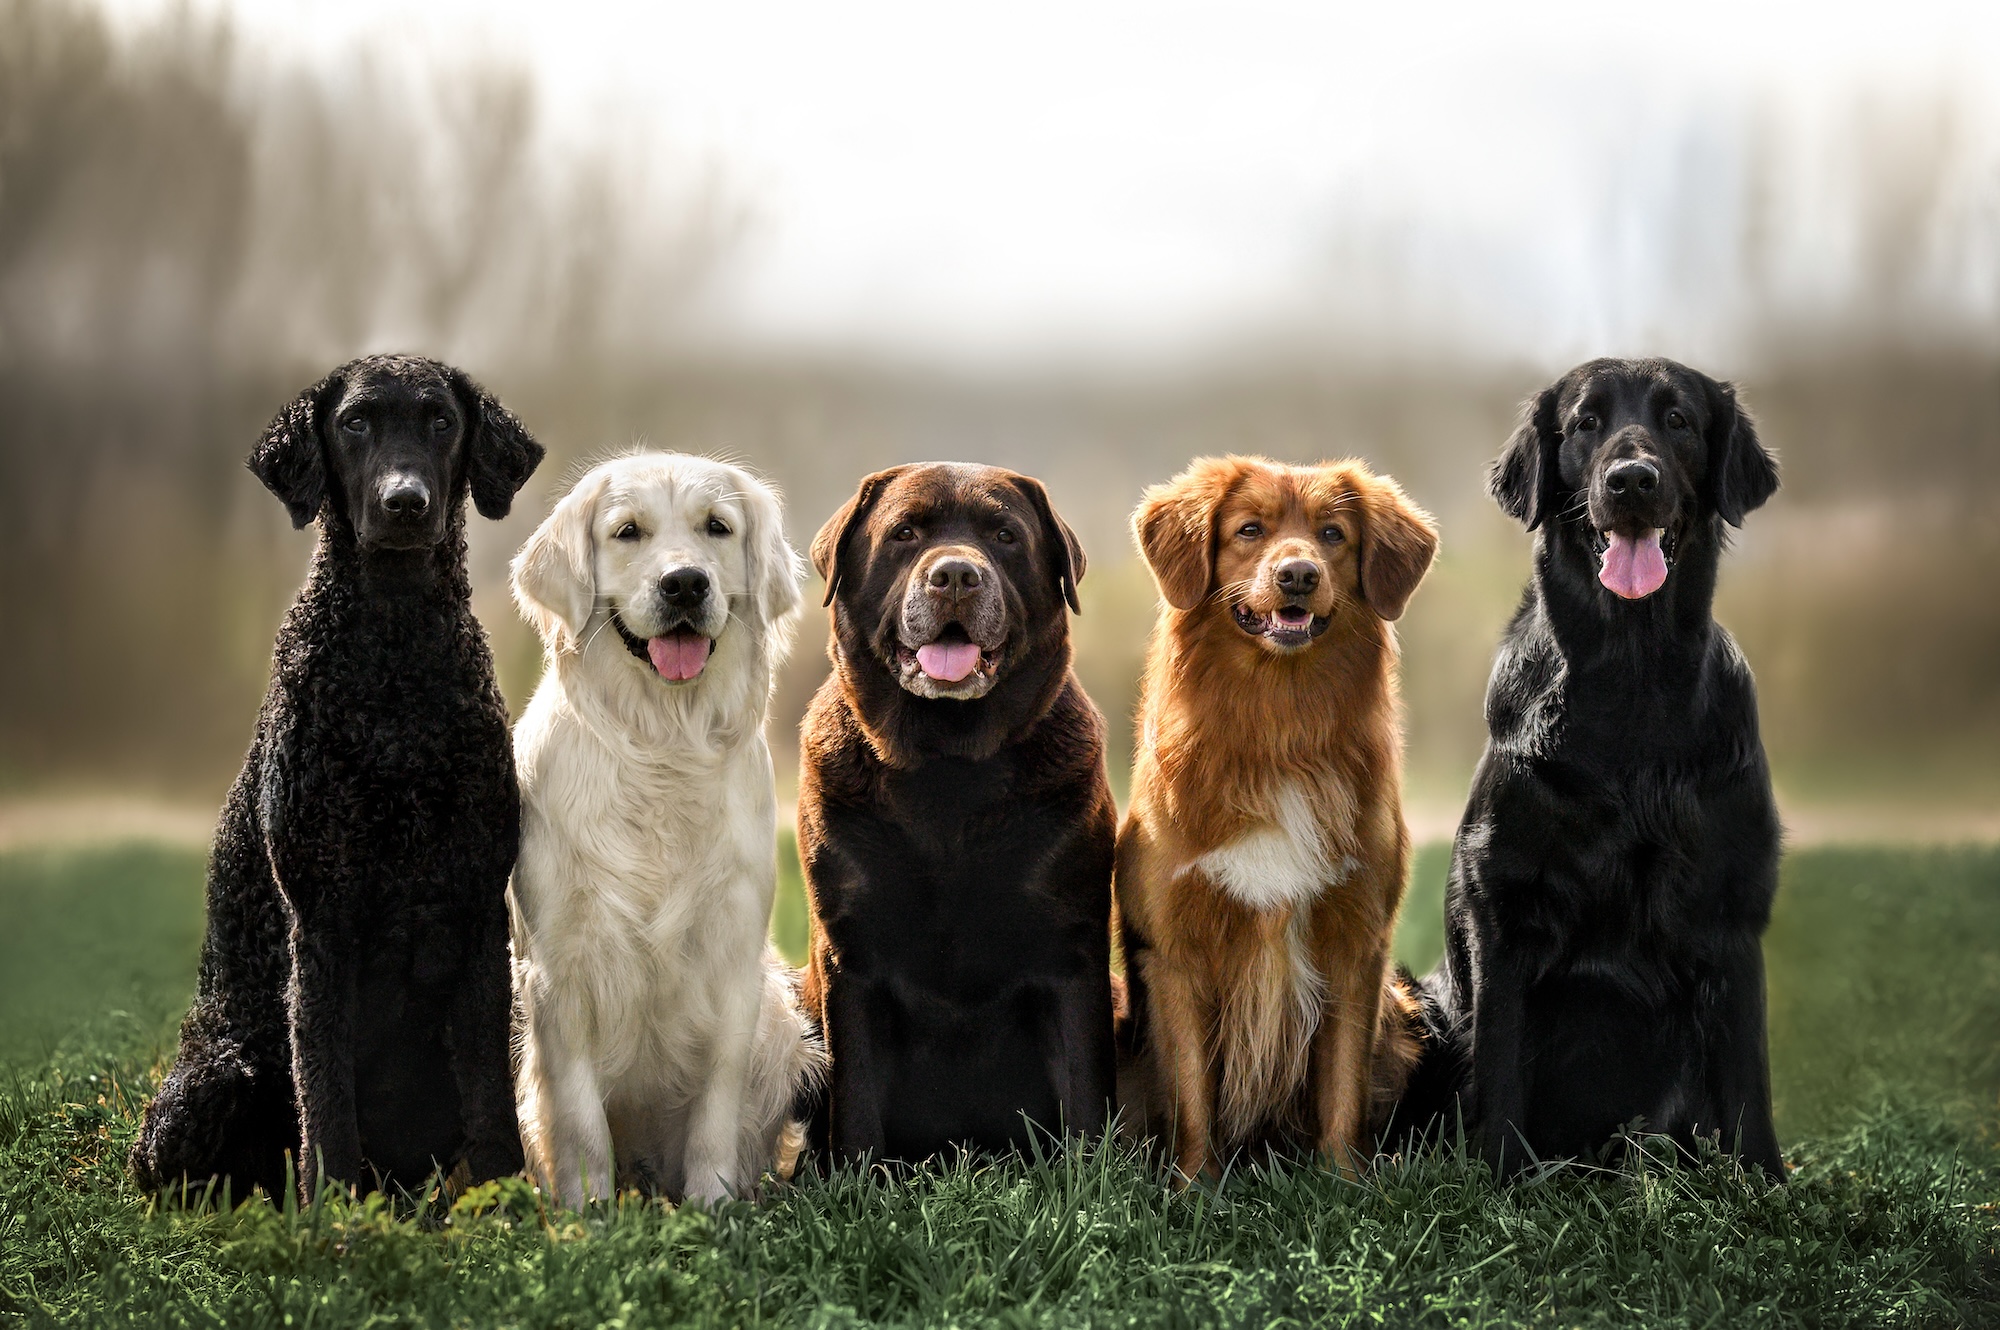 The best hunting dogs include, from left, a curly coated retriever, golden retriever, Labrador, Nova Scotia duck tolling retriever and flat coated retriever all sitting together.